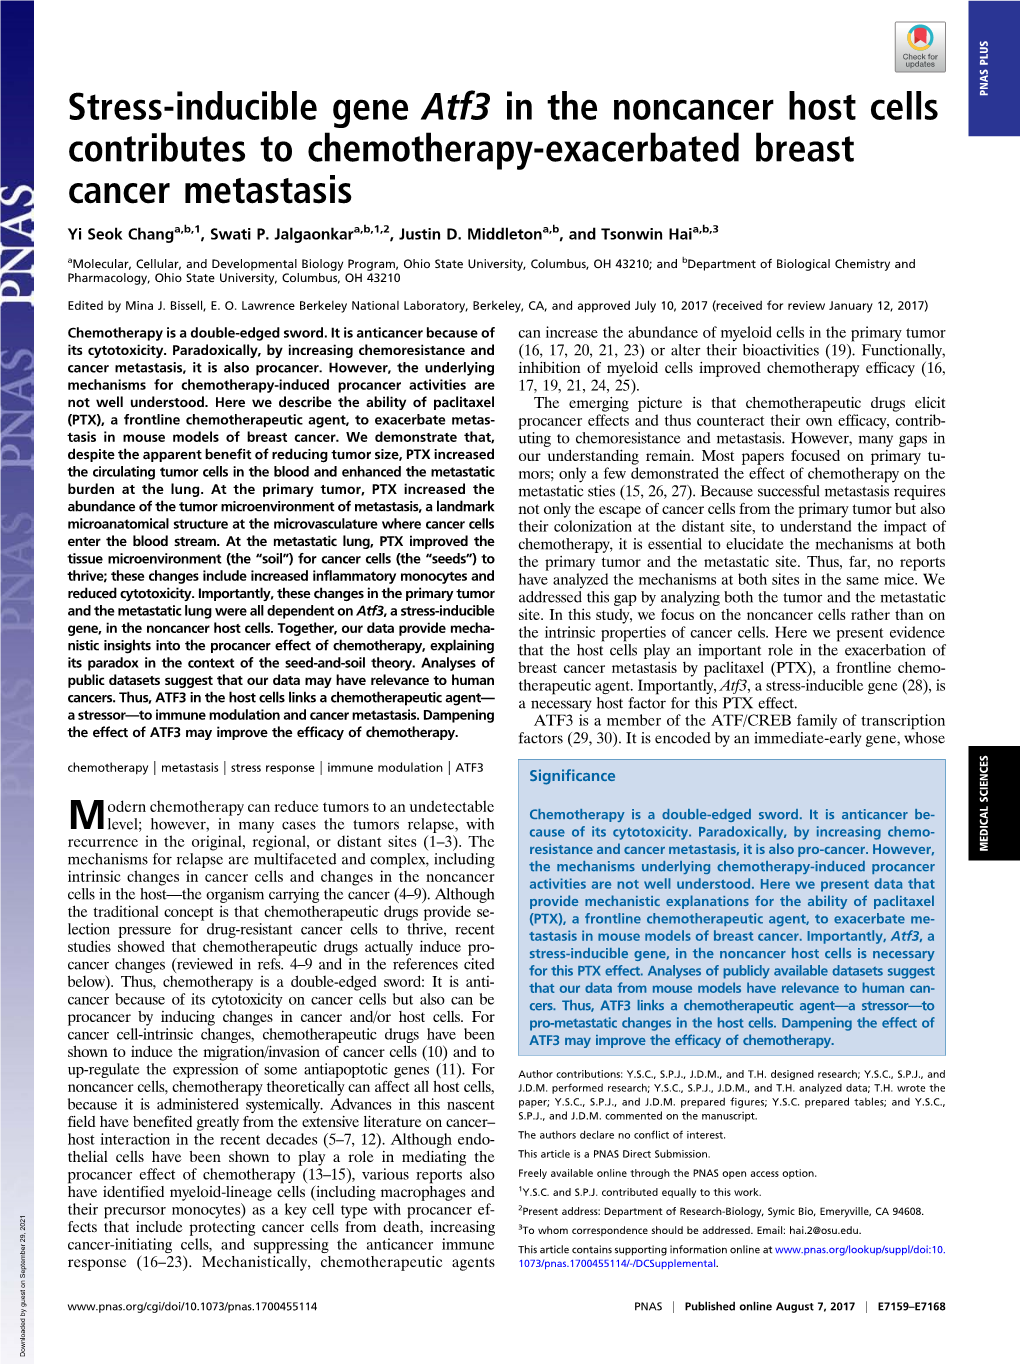 Stress-Inducible Gene Atf3 in the Noncancer Host Cells Contributes To